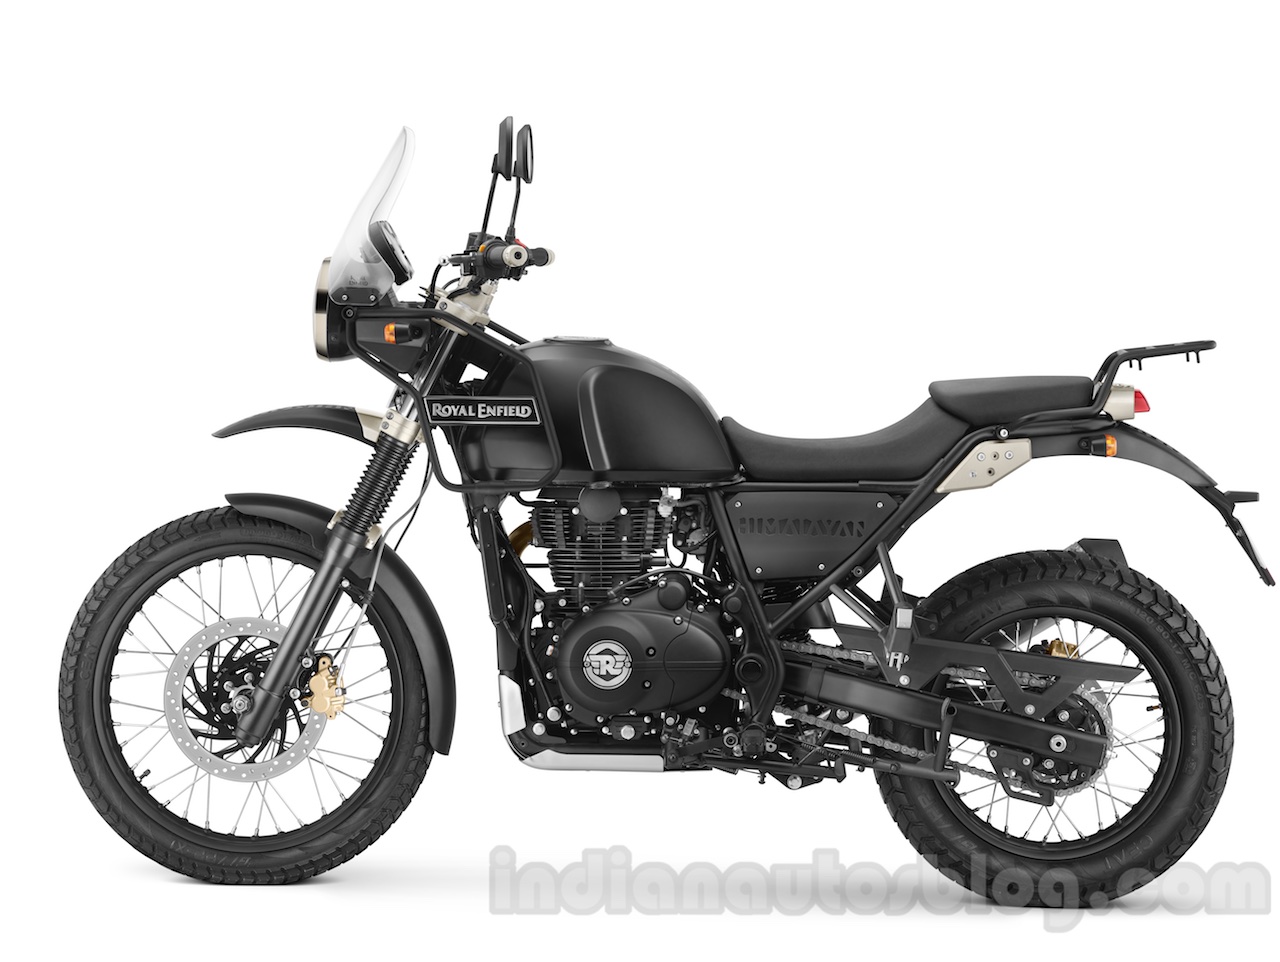 Royal Enfield Himalayan (Carb version) First Test - OVERLAND magazine